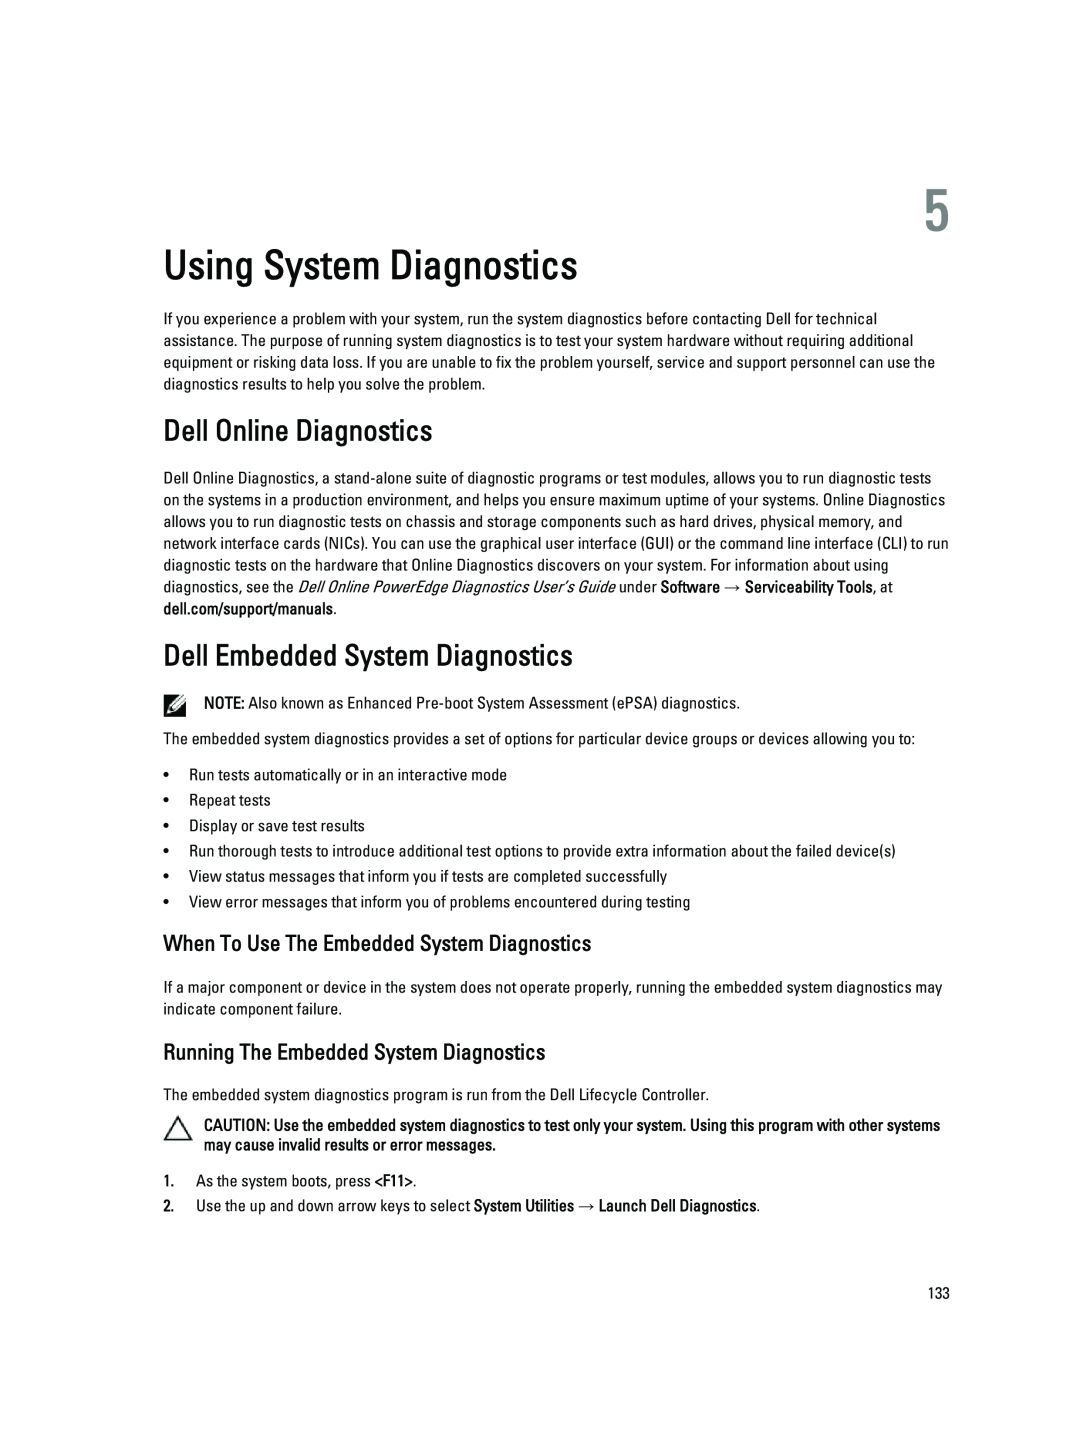 Dell R720XD owner manual Using System Diagnostics, Dell Online Diagnostics, Dell Embedded System Diagnostics 